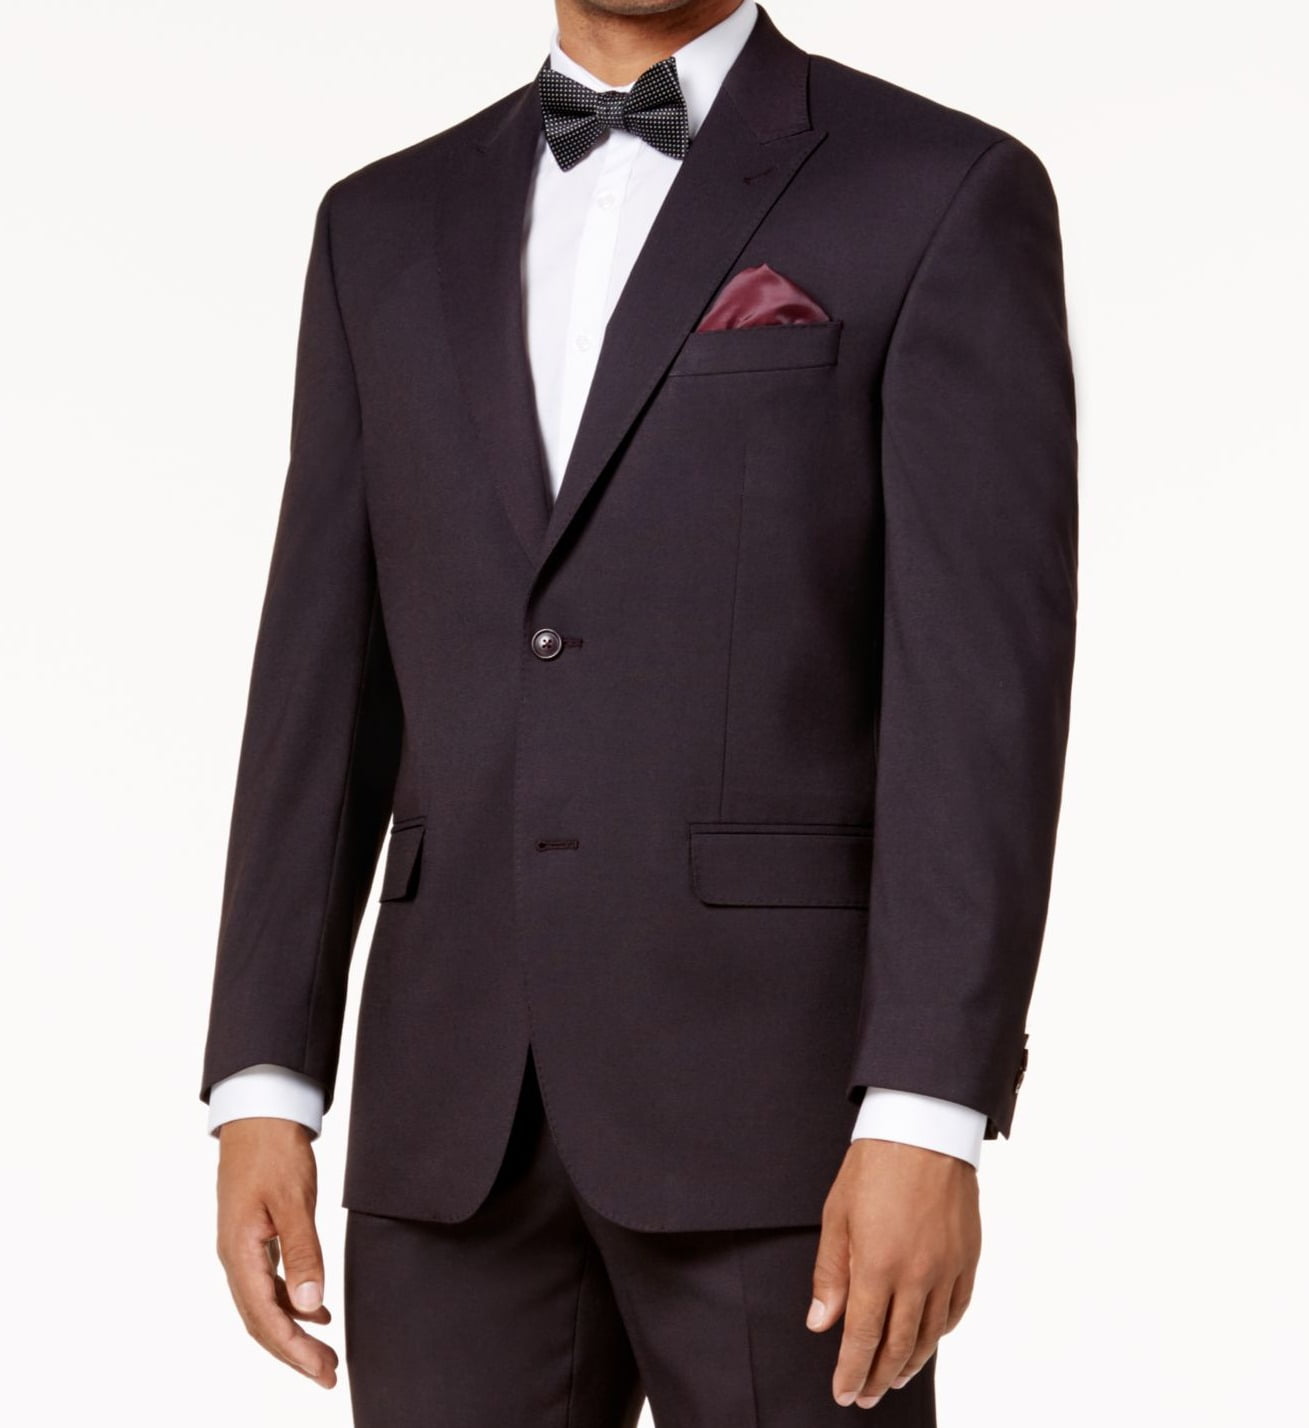 Sean John Suits & Suit Separates - Wine Mens Two Button Three Pocket ...